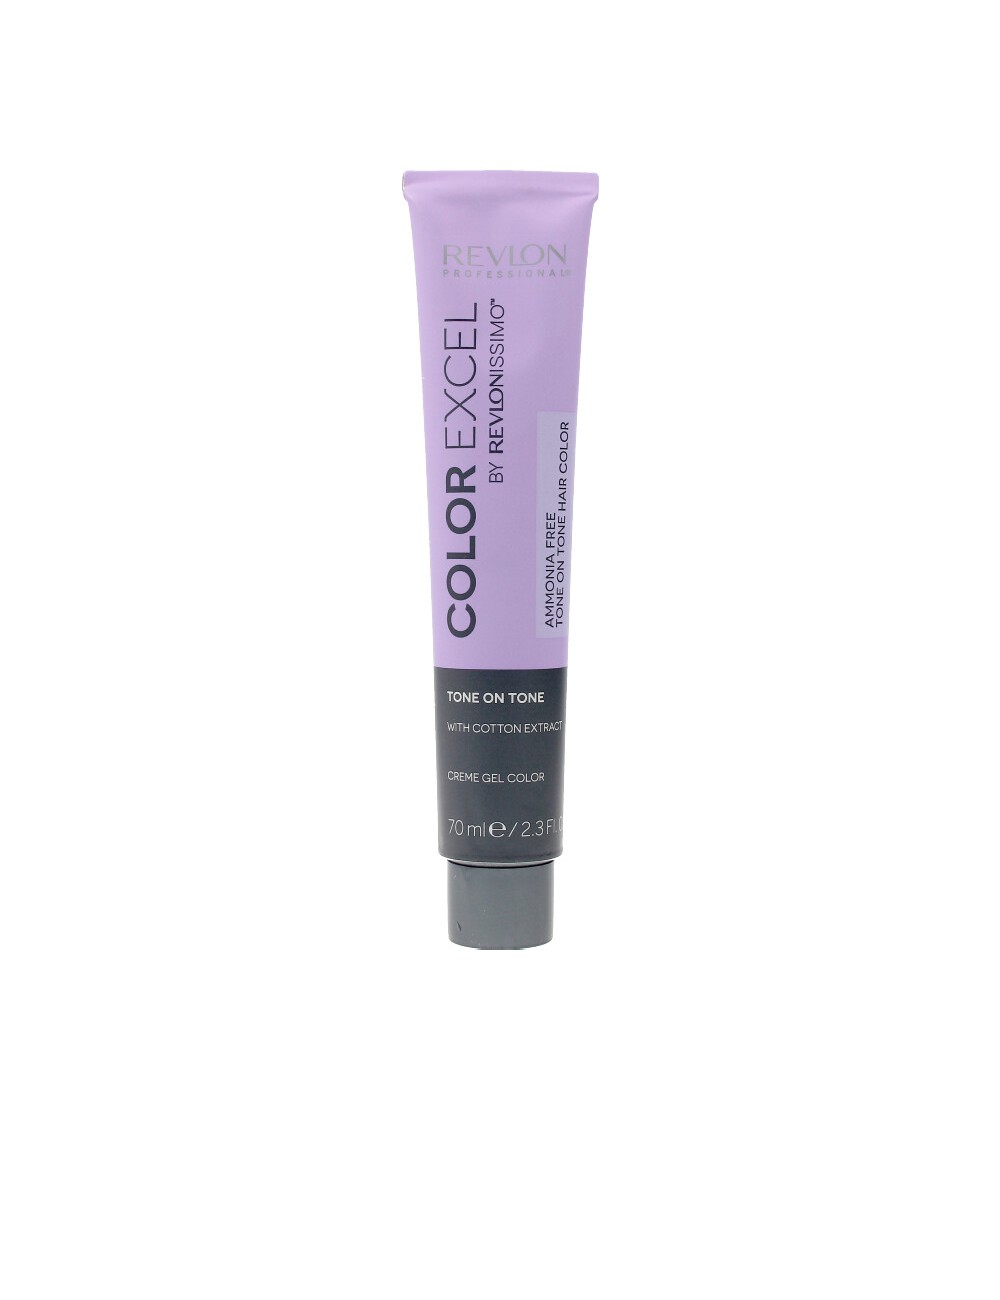 YOUNG COLOR EXCEL creme gel color 70ml